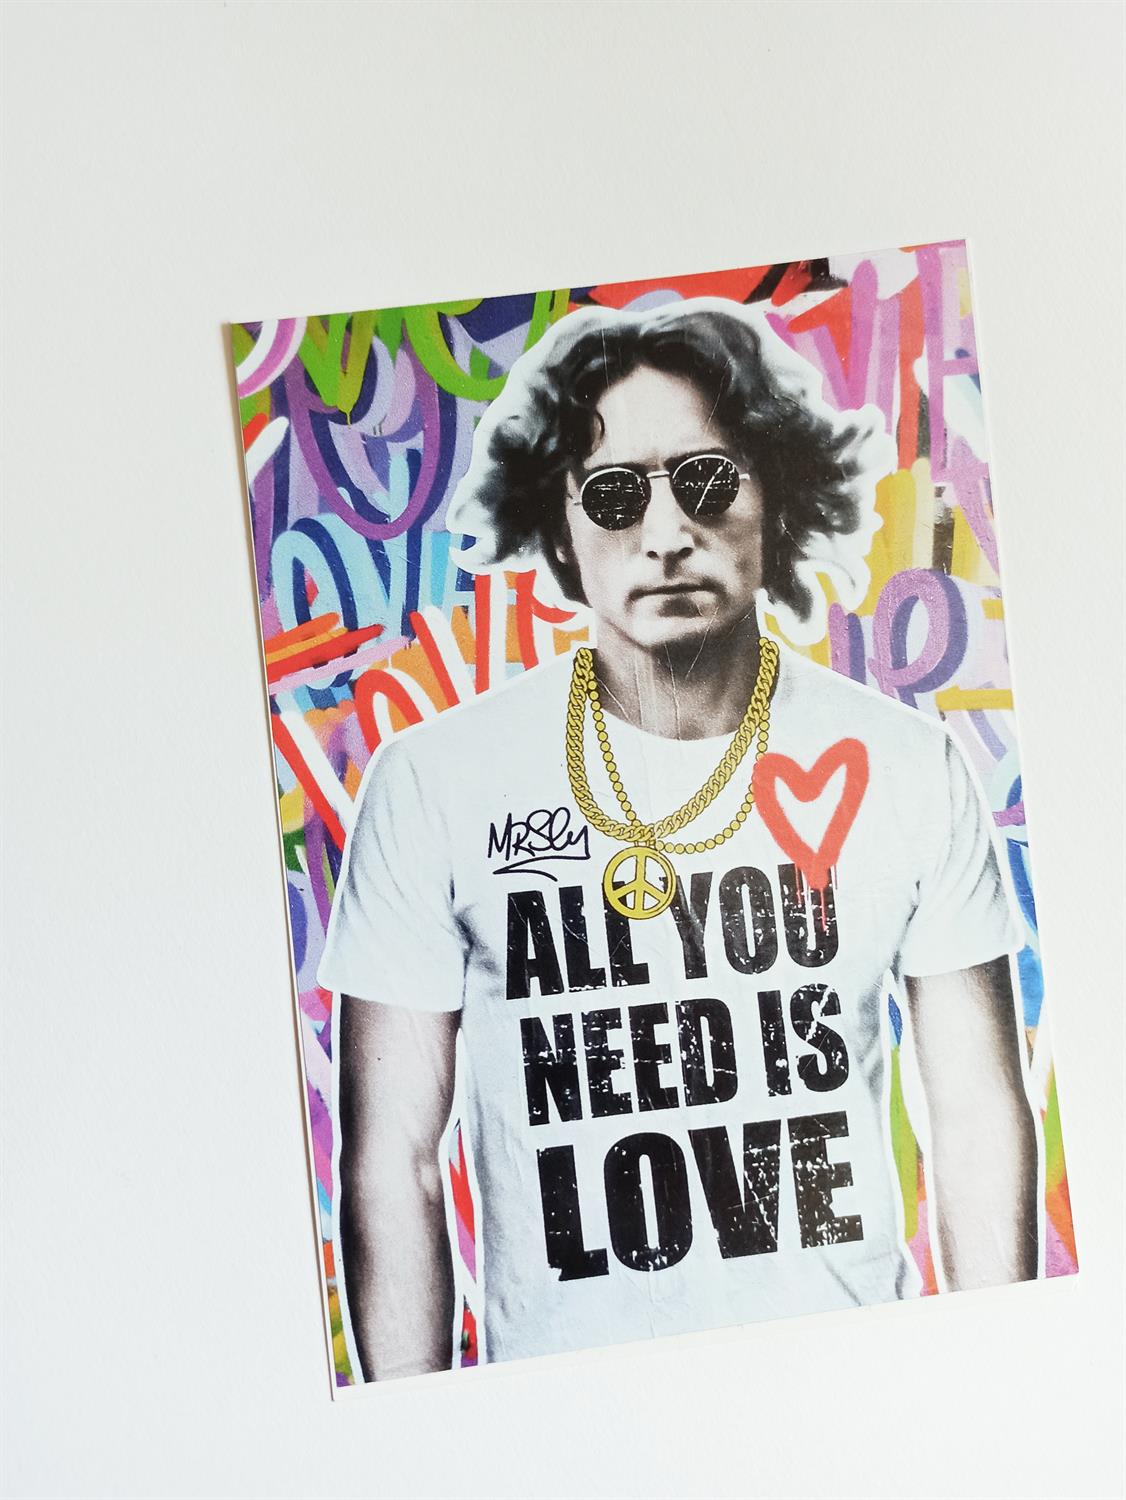 Mr Sly, All You Need Is Love, 2020 - Image 2 of 3